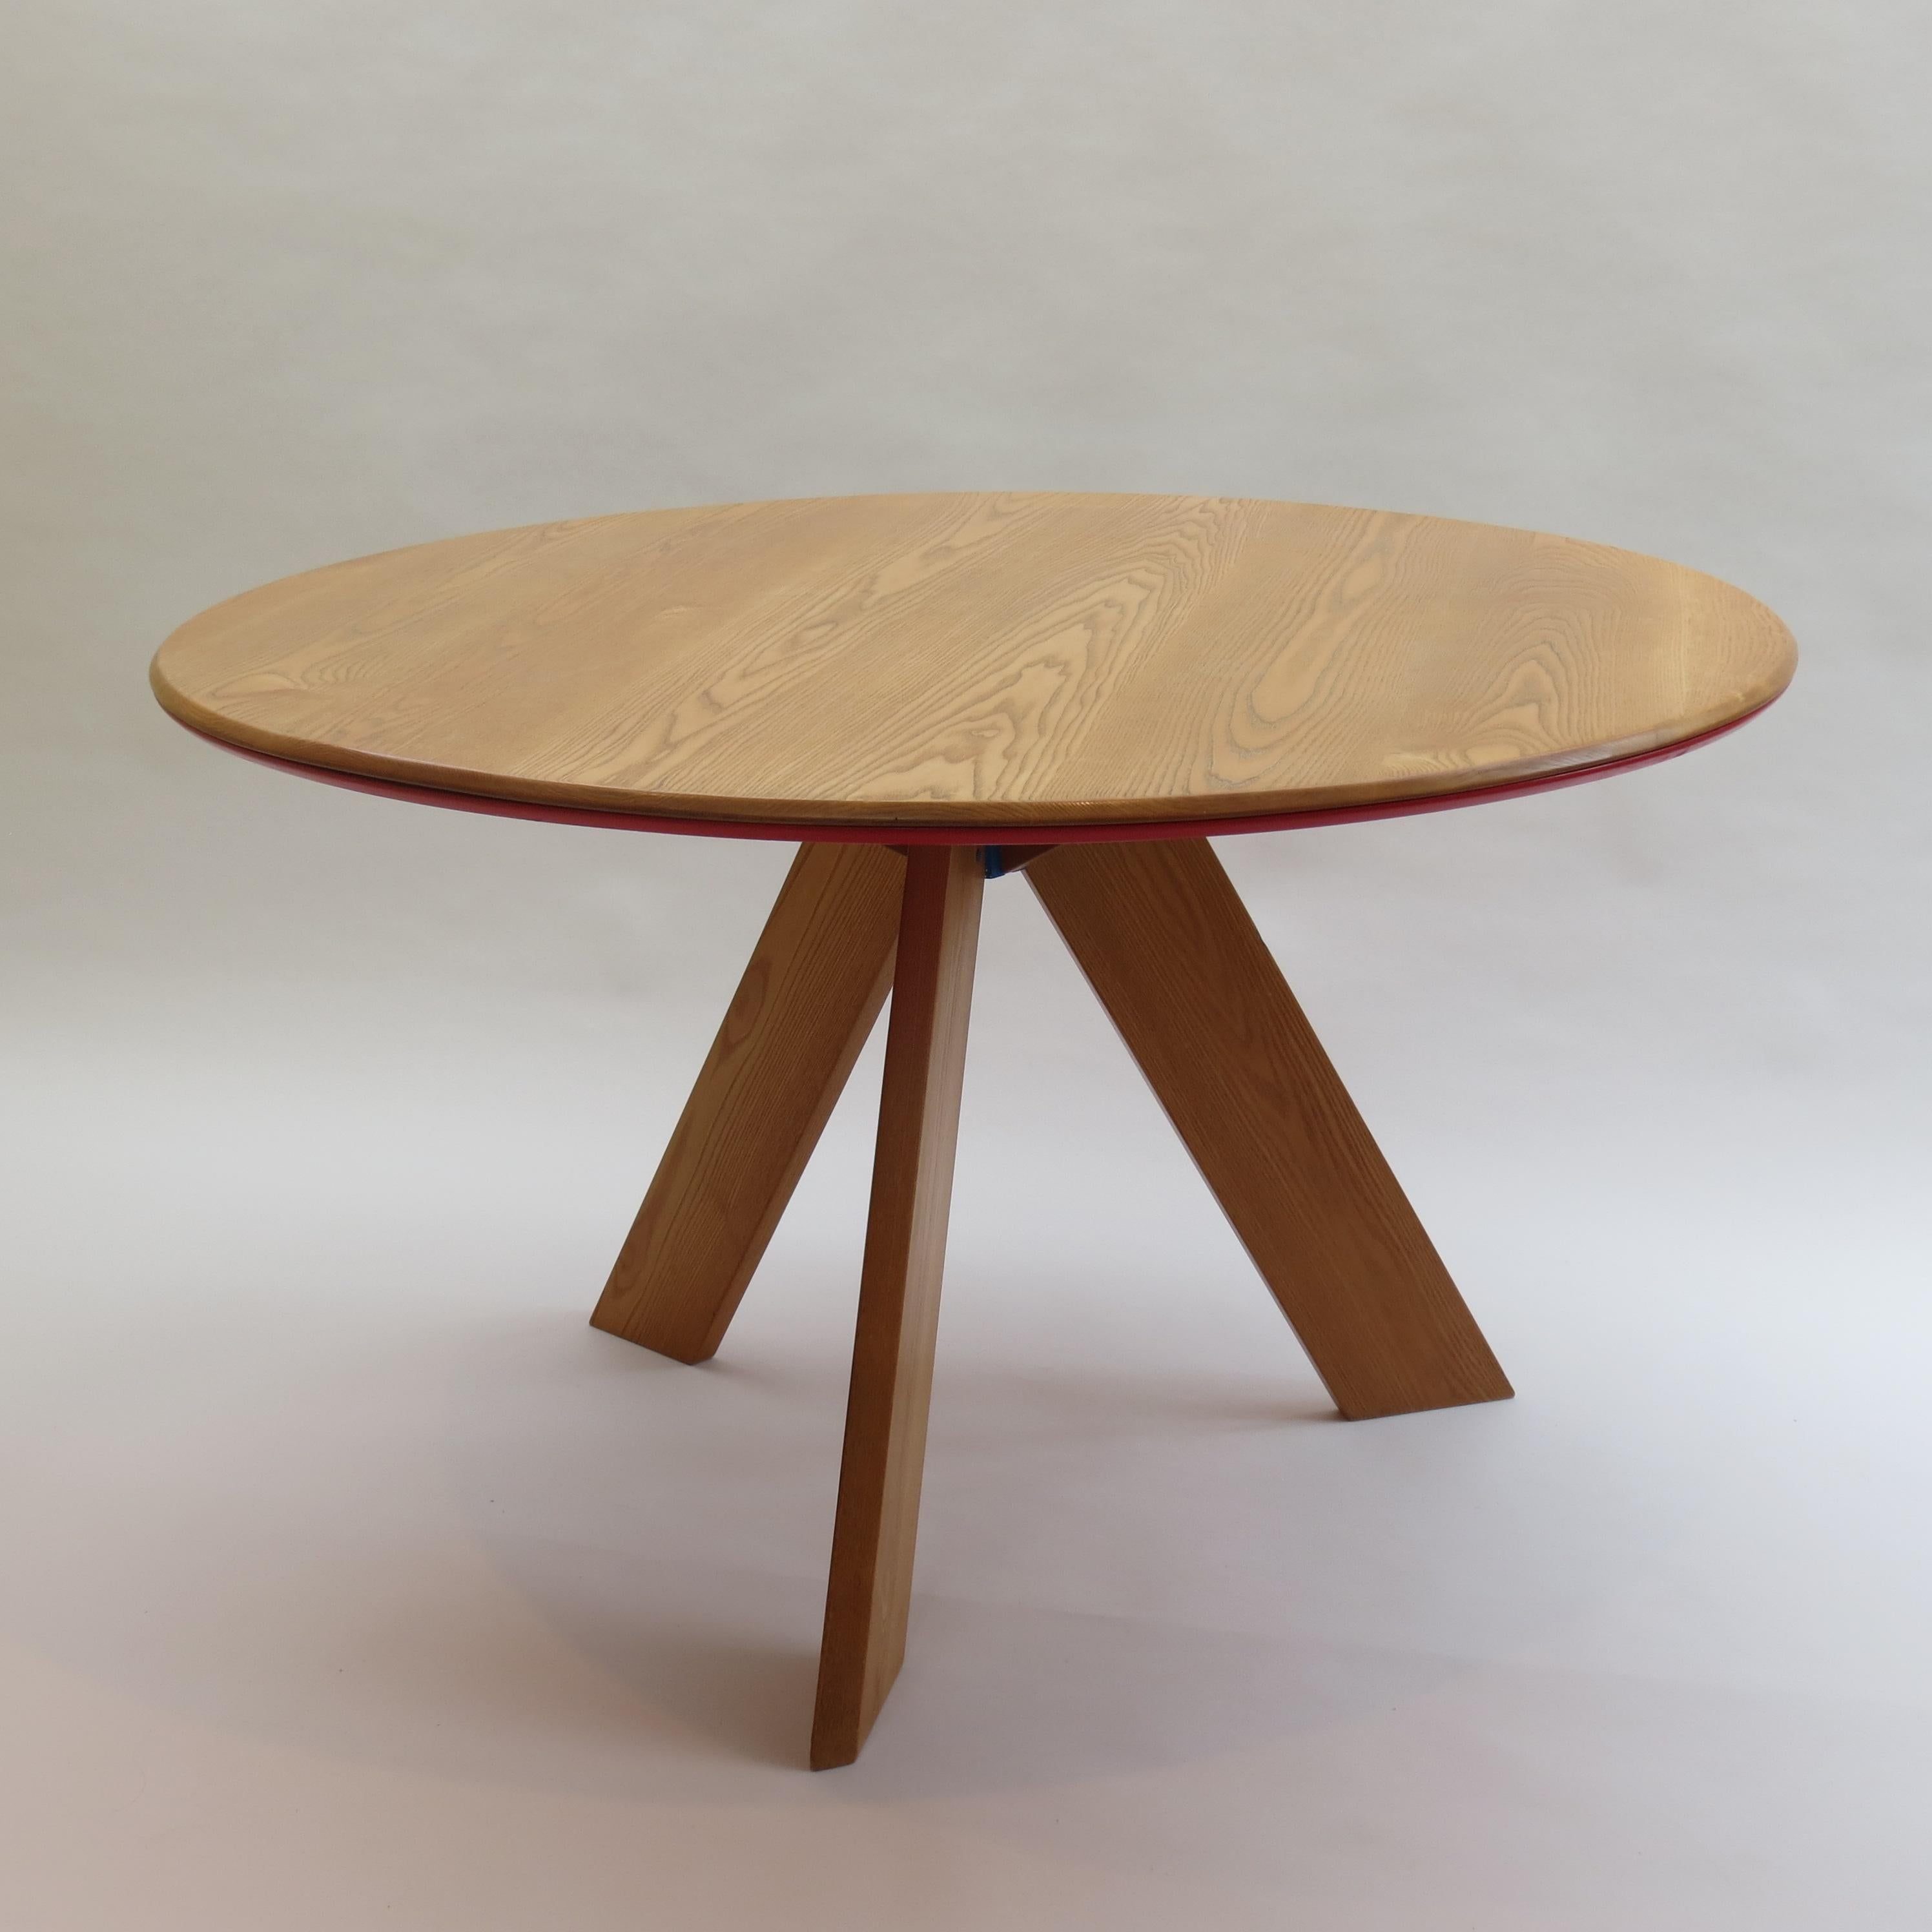 Midcentury Bespoke Round Dining Table by David Field 1980s with Red and Blue Det 6